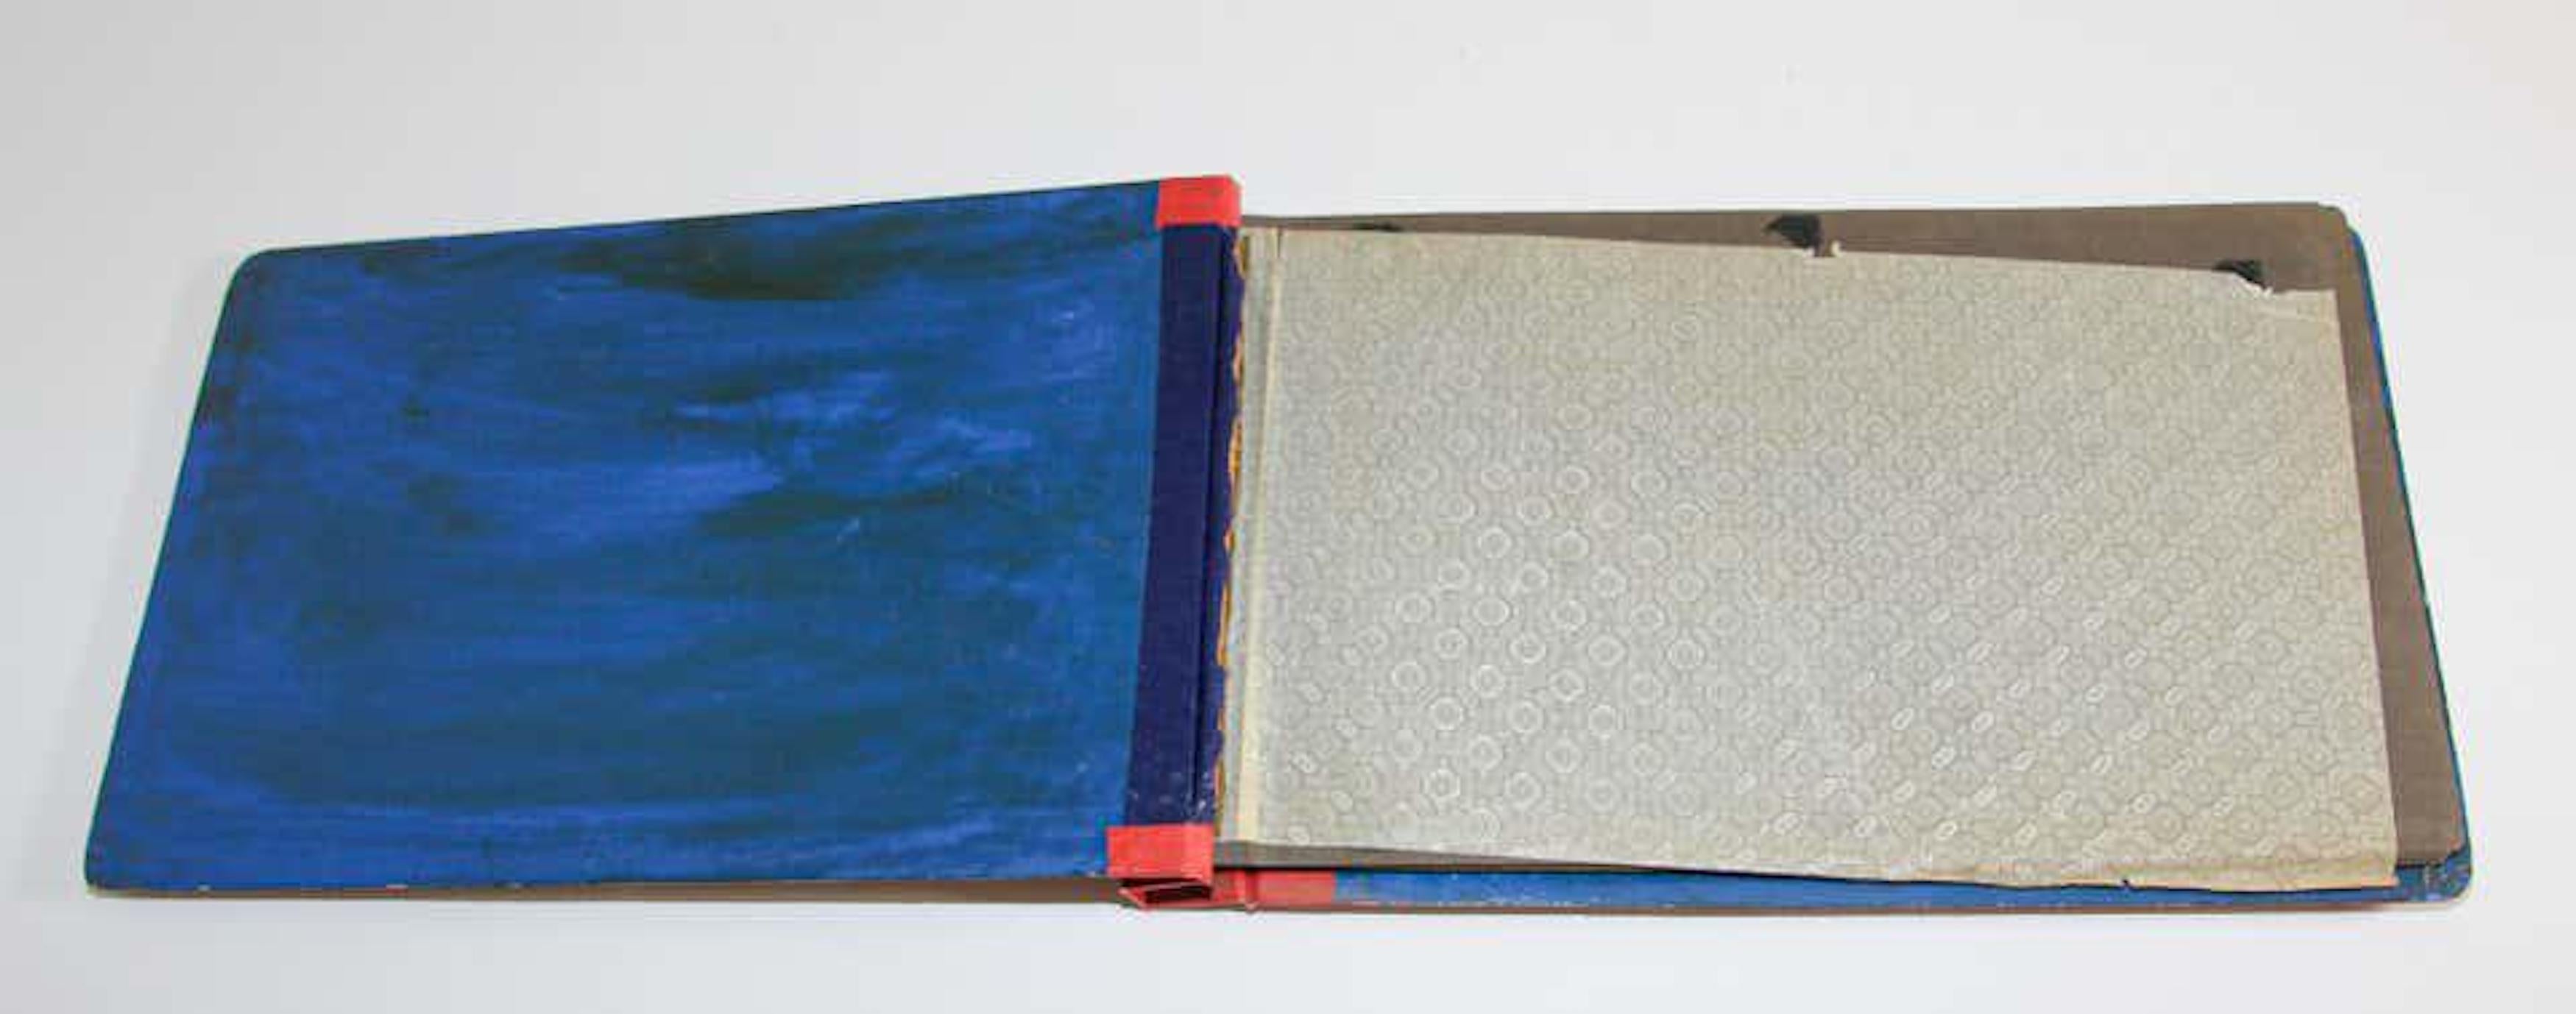 Hand Painted Middle Eastern Moorish Style Photo Album, 19th Century For Sale 4